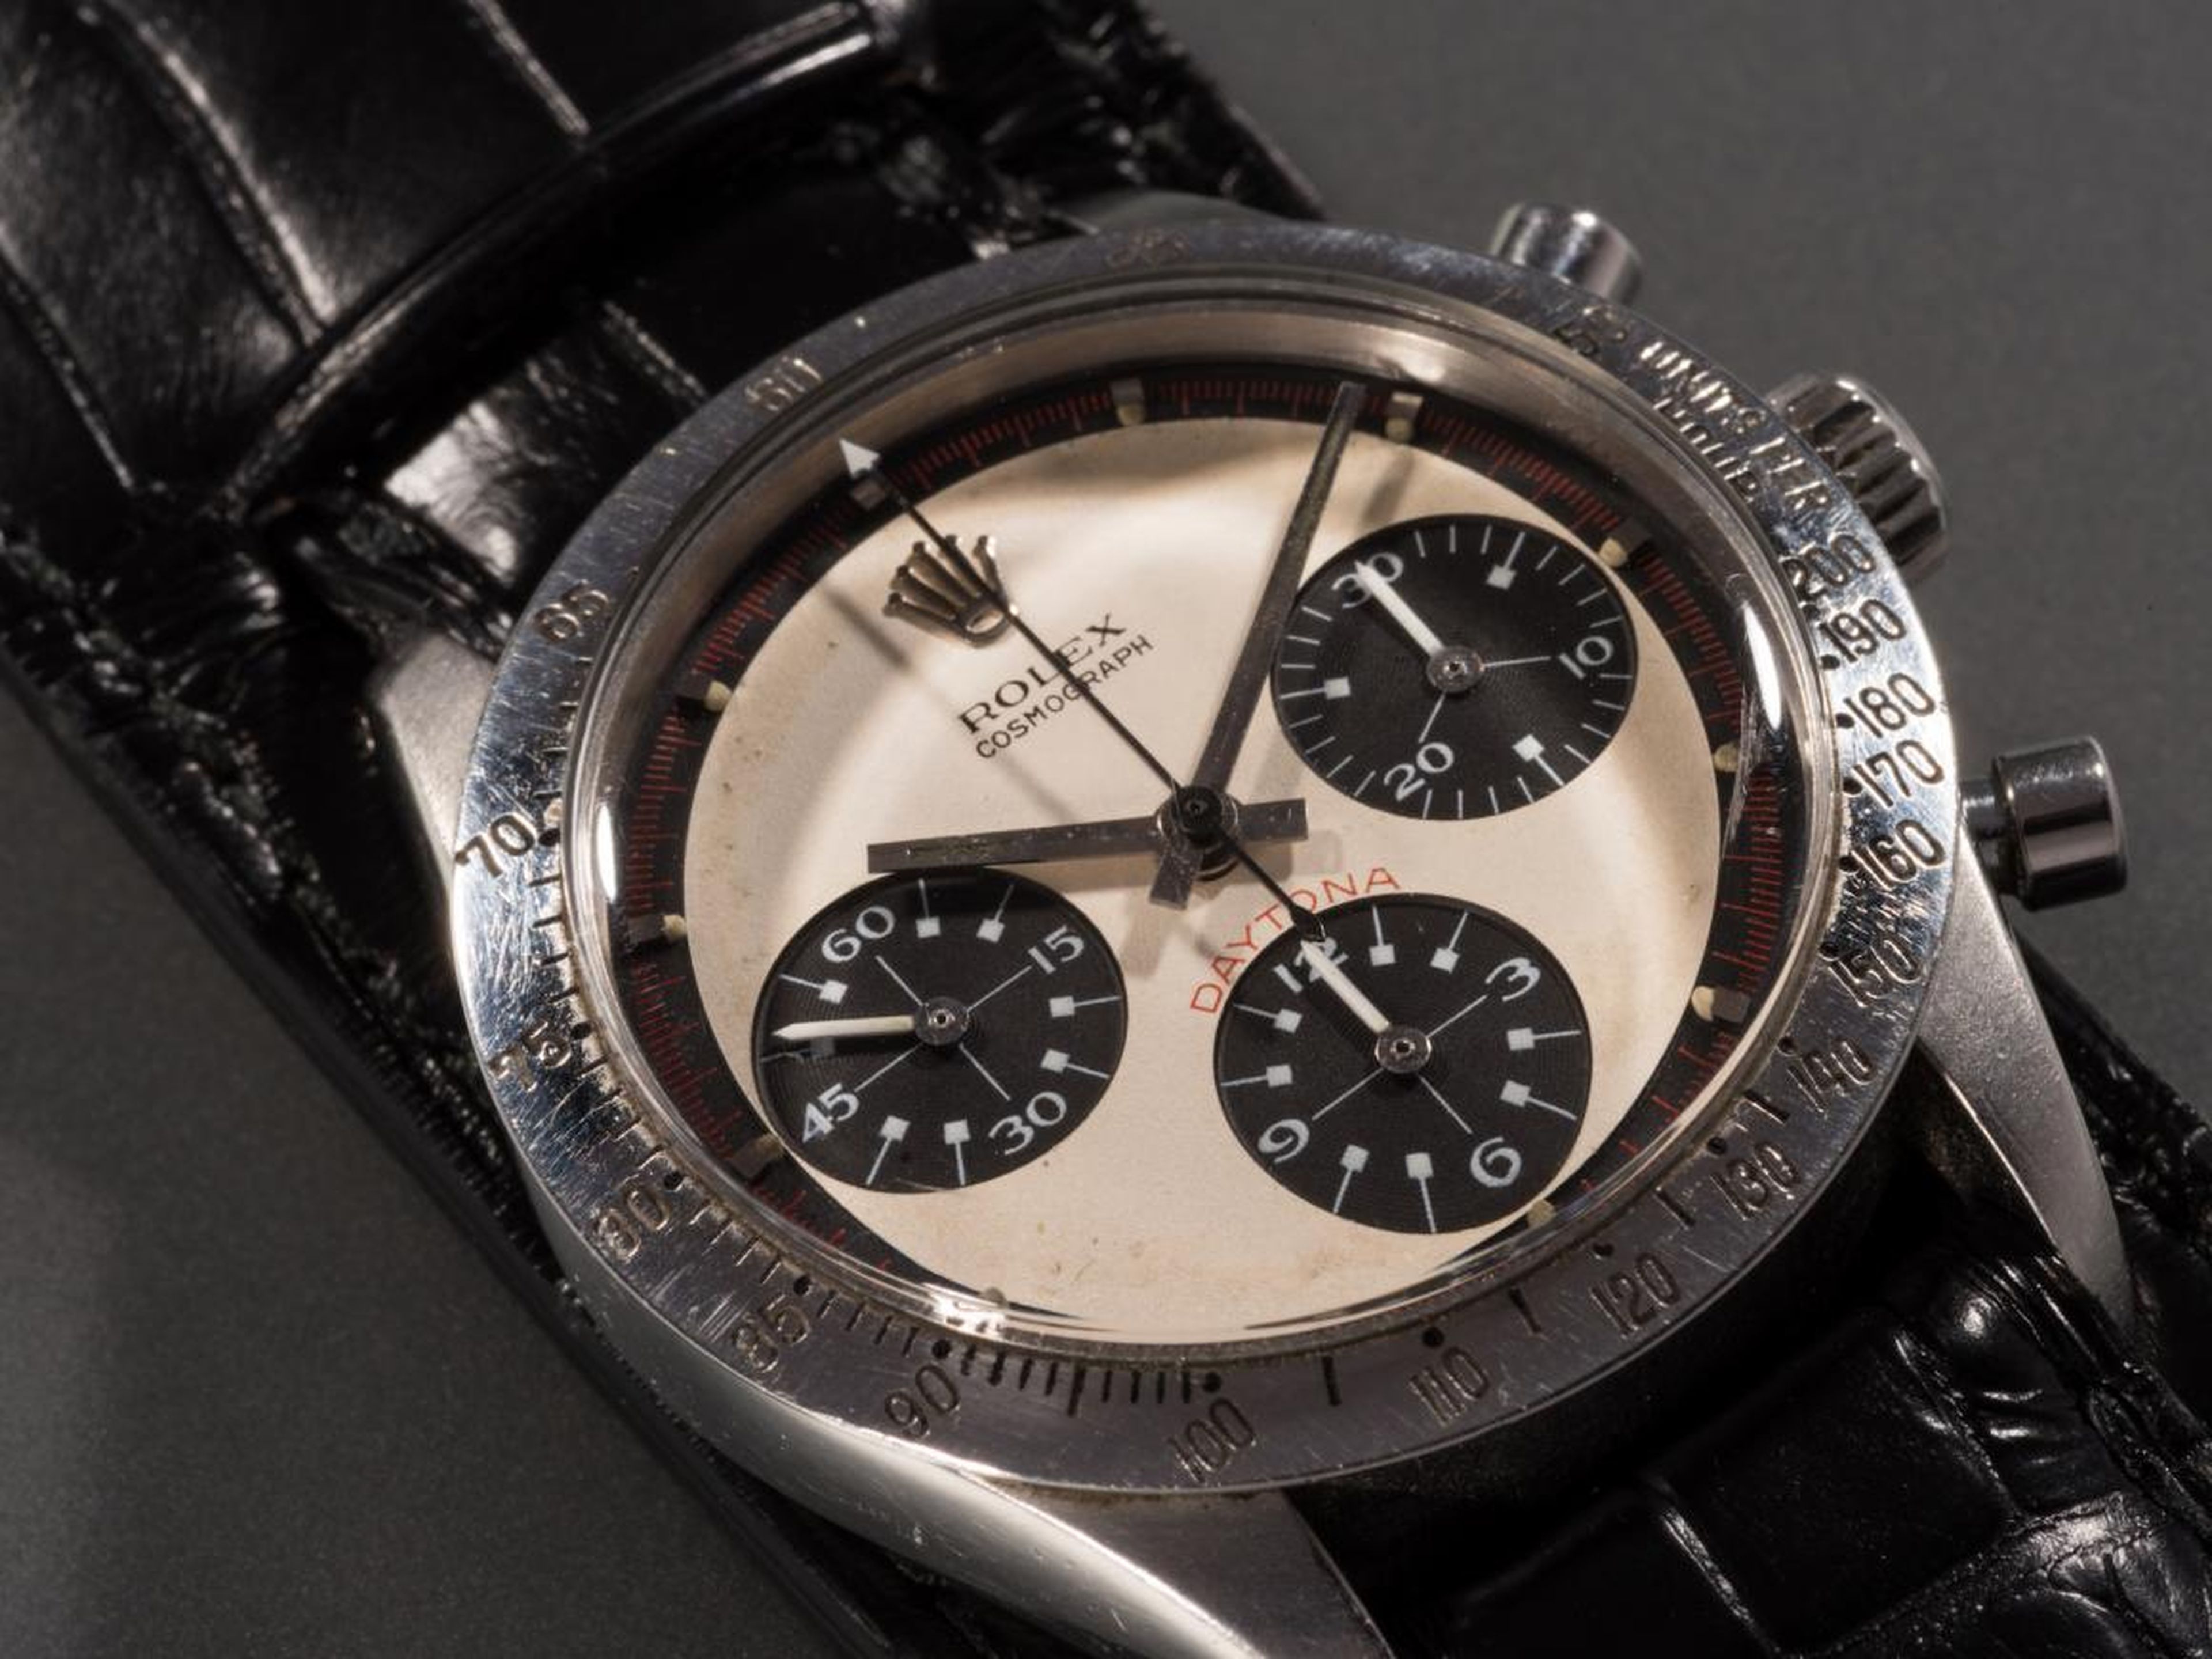 ... but prices can reach up to the several millions. Paul Newman's Rolex Daytona sold for a whopping $17.8 million at auction in 2017, making it the most expensive watch ever sold at auction.